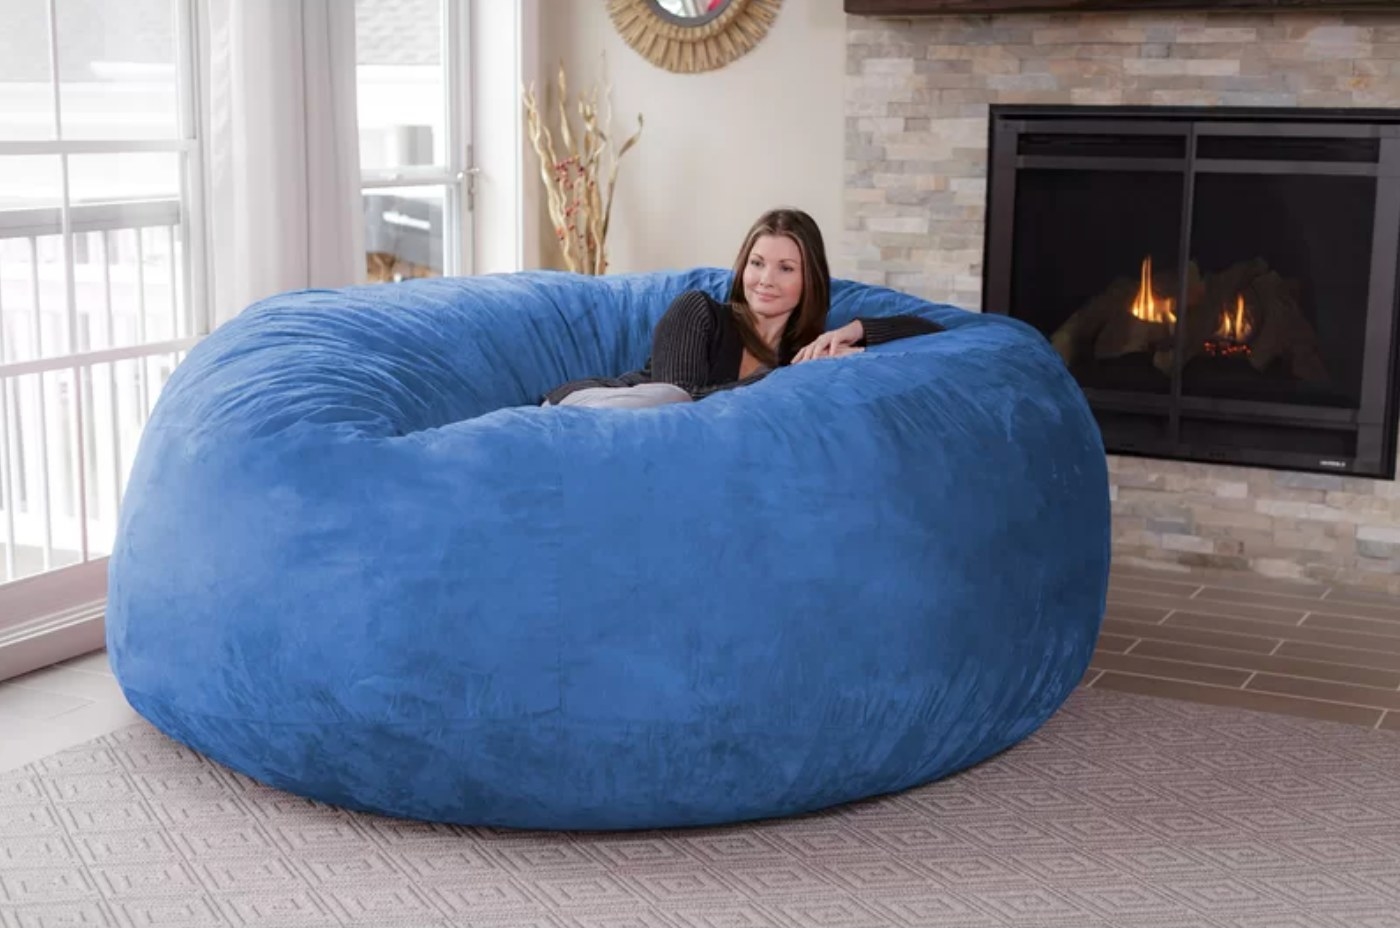 The large classic bean bag in royal blue